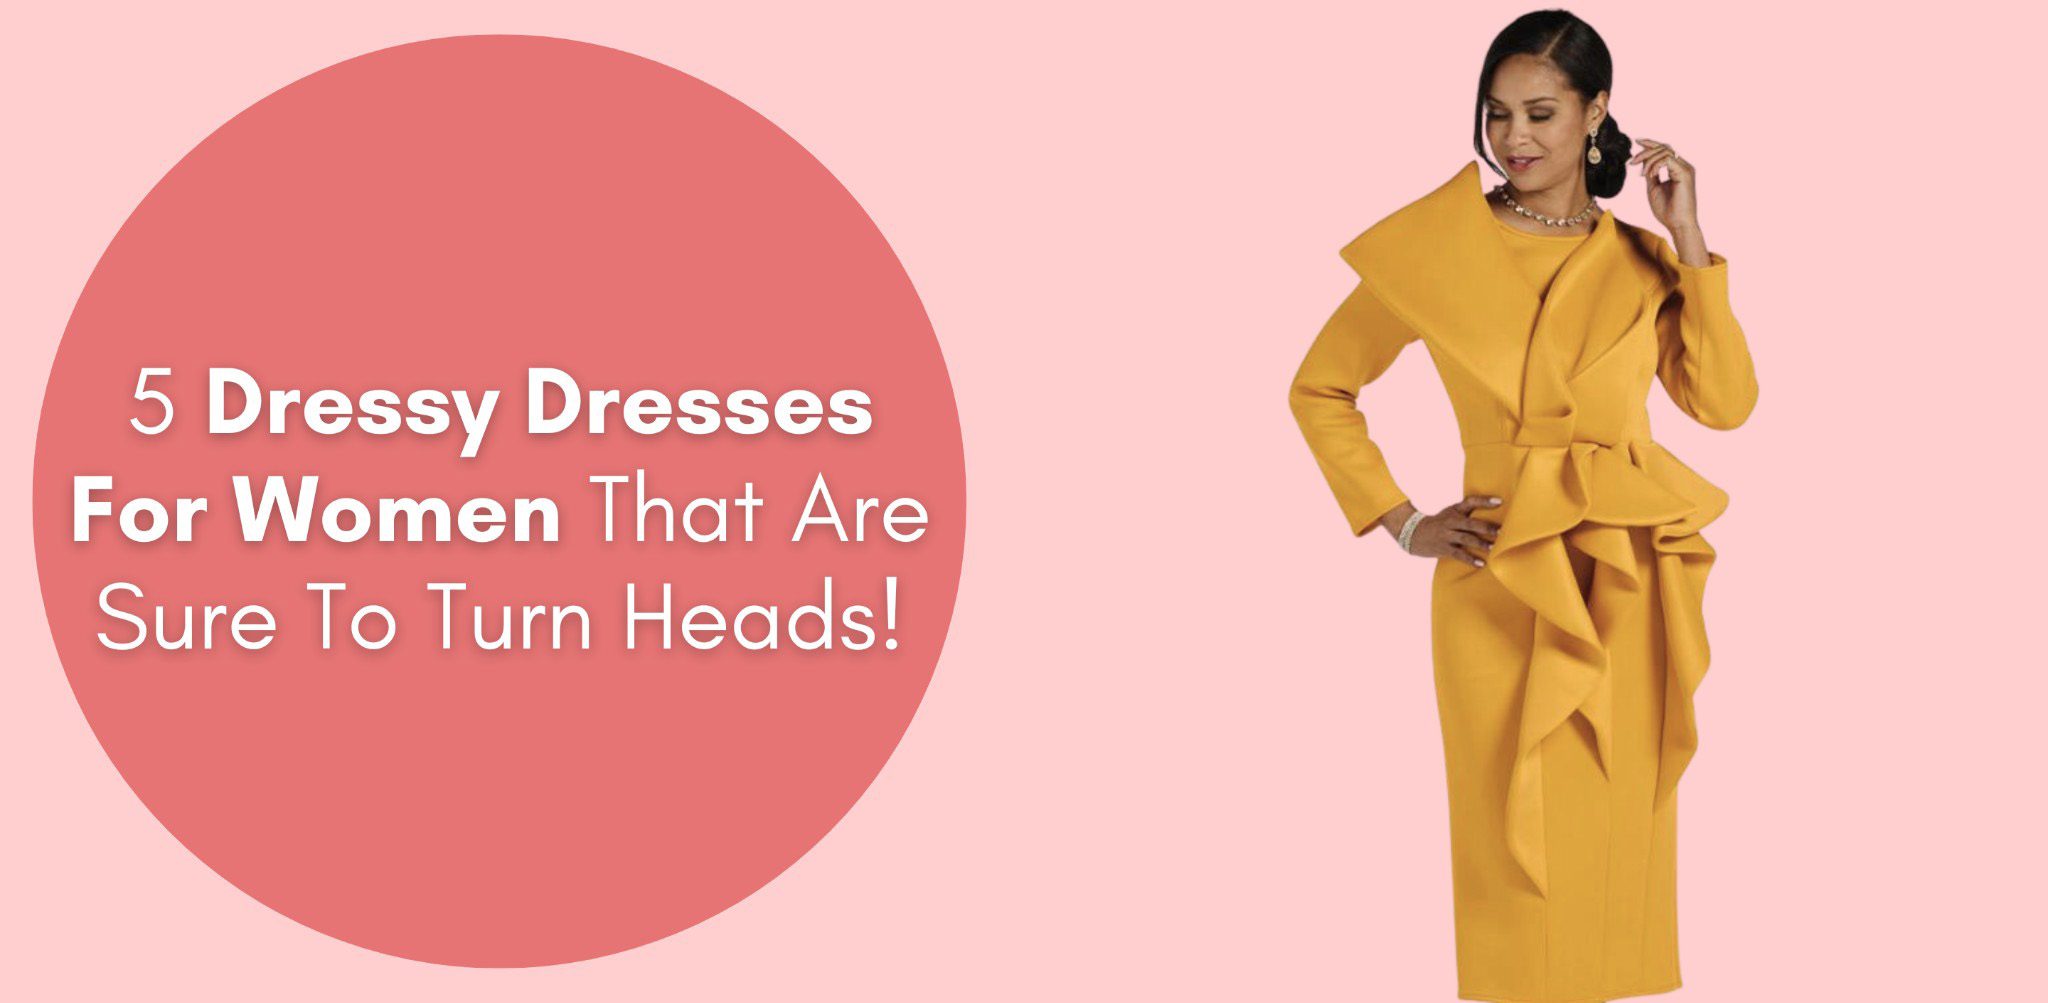 5 Dressy Dresses For Women That Are Sure To Turn Heads!